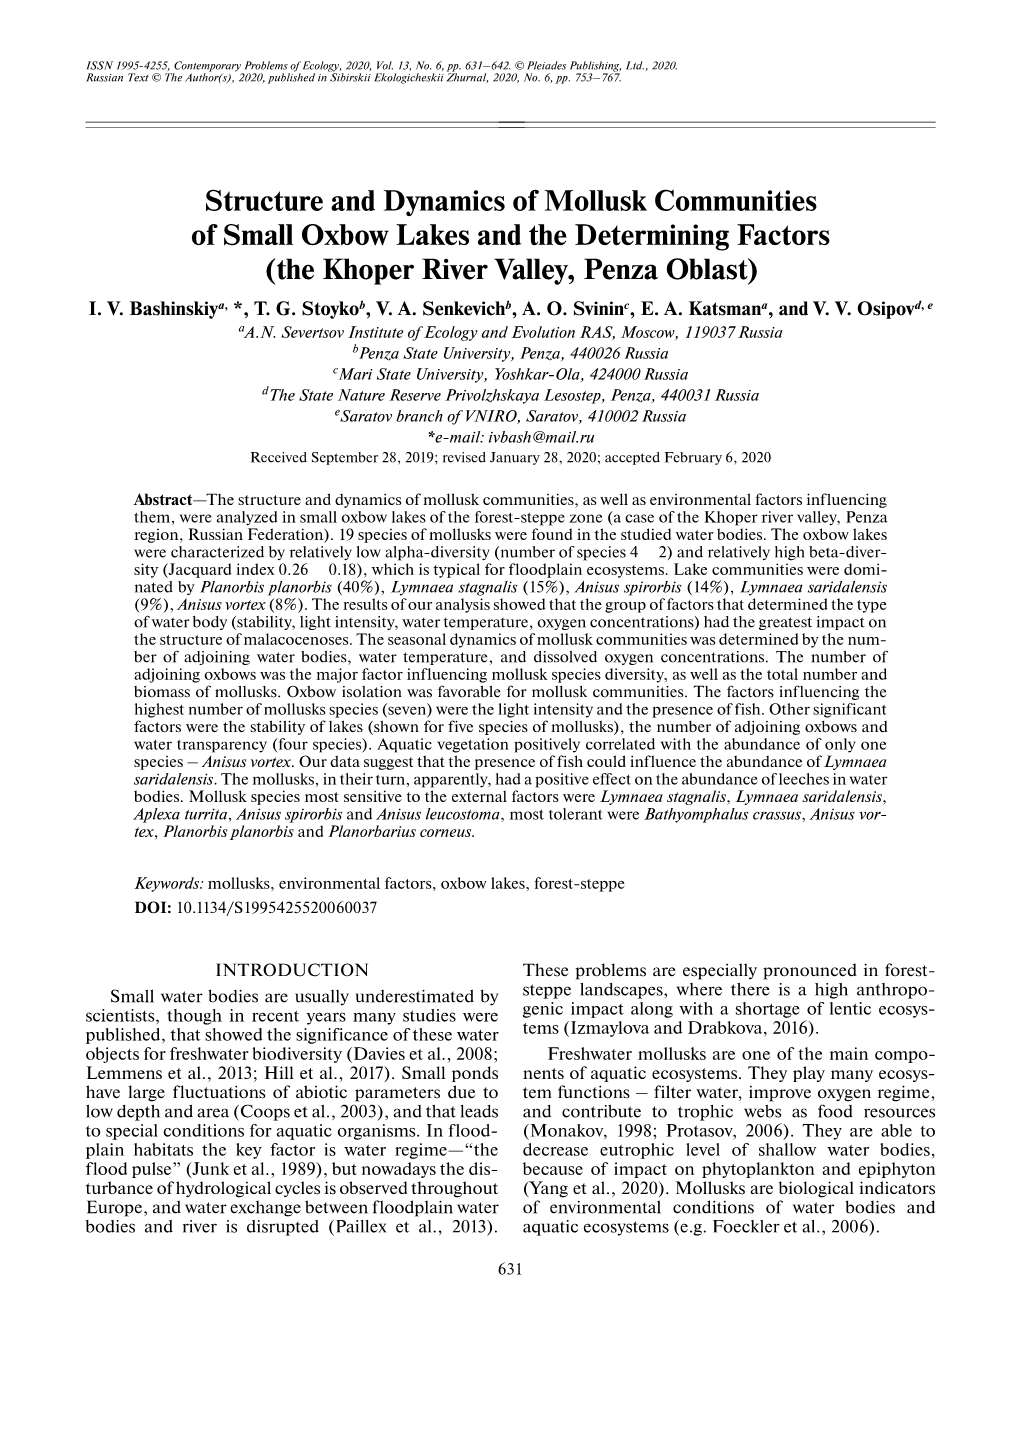 Structure and Dynamics of Mollusk Communities of Small Oxbow Lakes and the Determining Factors (The Khoper River Valley, Penza Oblast) I